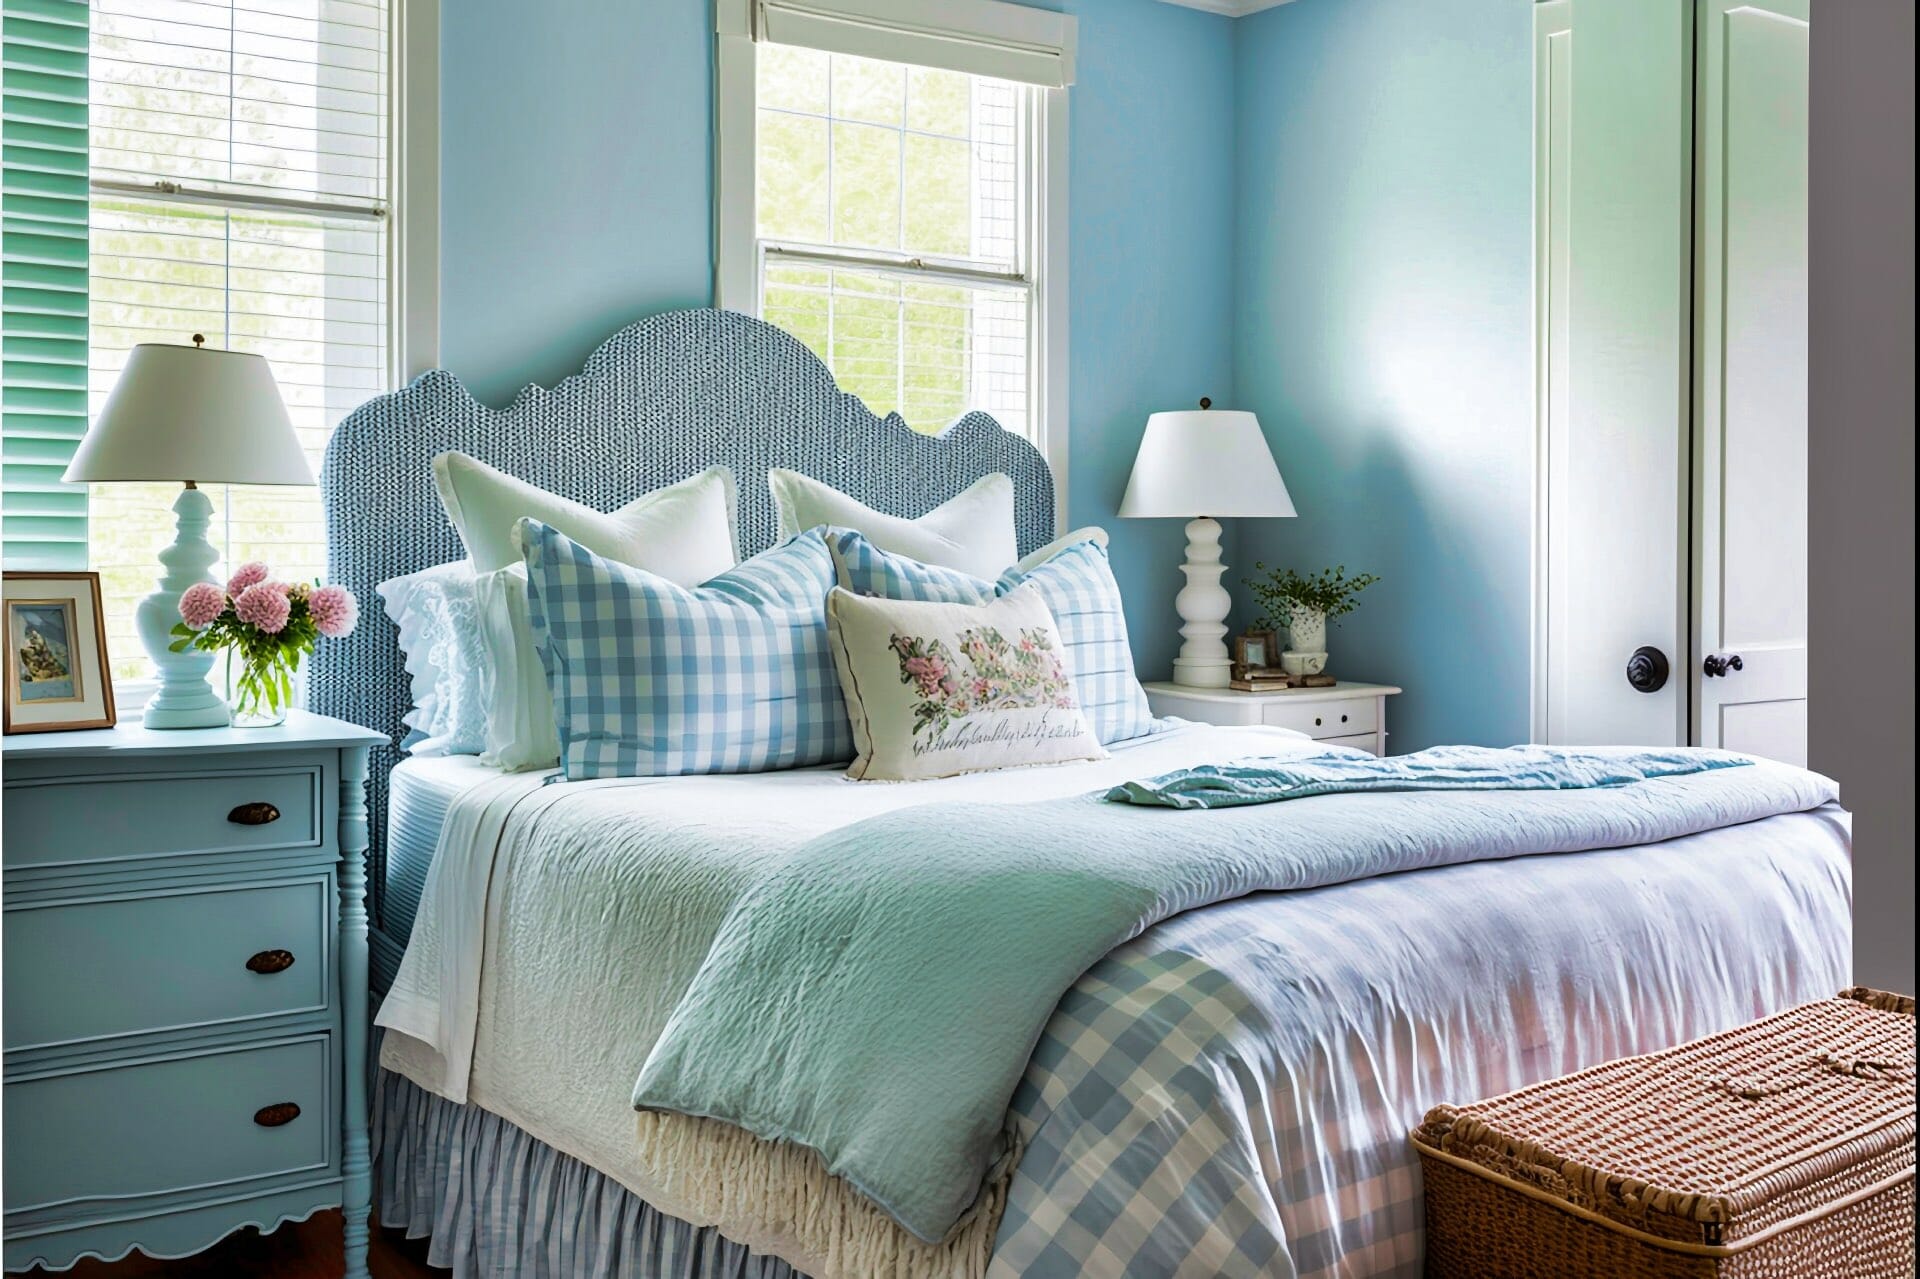 Cottage Style Bedroom With A Charming Country Vibe, Thanks To The Soft Blue Walls And White Trim. A Queen Size Bed With A Simple White Headboard Is Dressed In A Blue And White Gingham Comforter, And A Collection Of Patterned Throw Pillows Add A Playful Touch. A Matching Blue Nightstand With A White Lamp Sits Beside The Bed, And A White Wicker Chair With A Fluffy Cushion Provides A Cozy Seating Option. A Braided Rug In Shades Of Blue And White Anchors The Space, And A Collection Of Framed Botanical Prints Adds A Touch Of Nature.